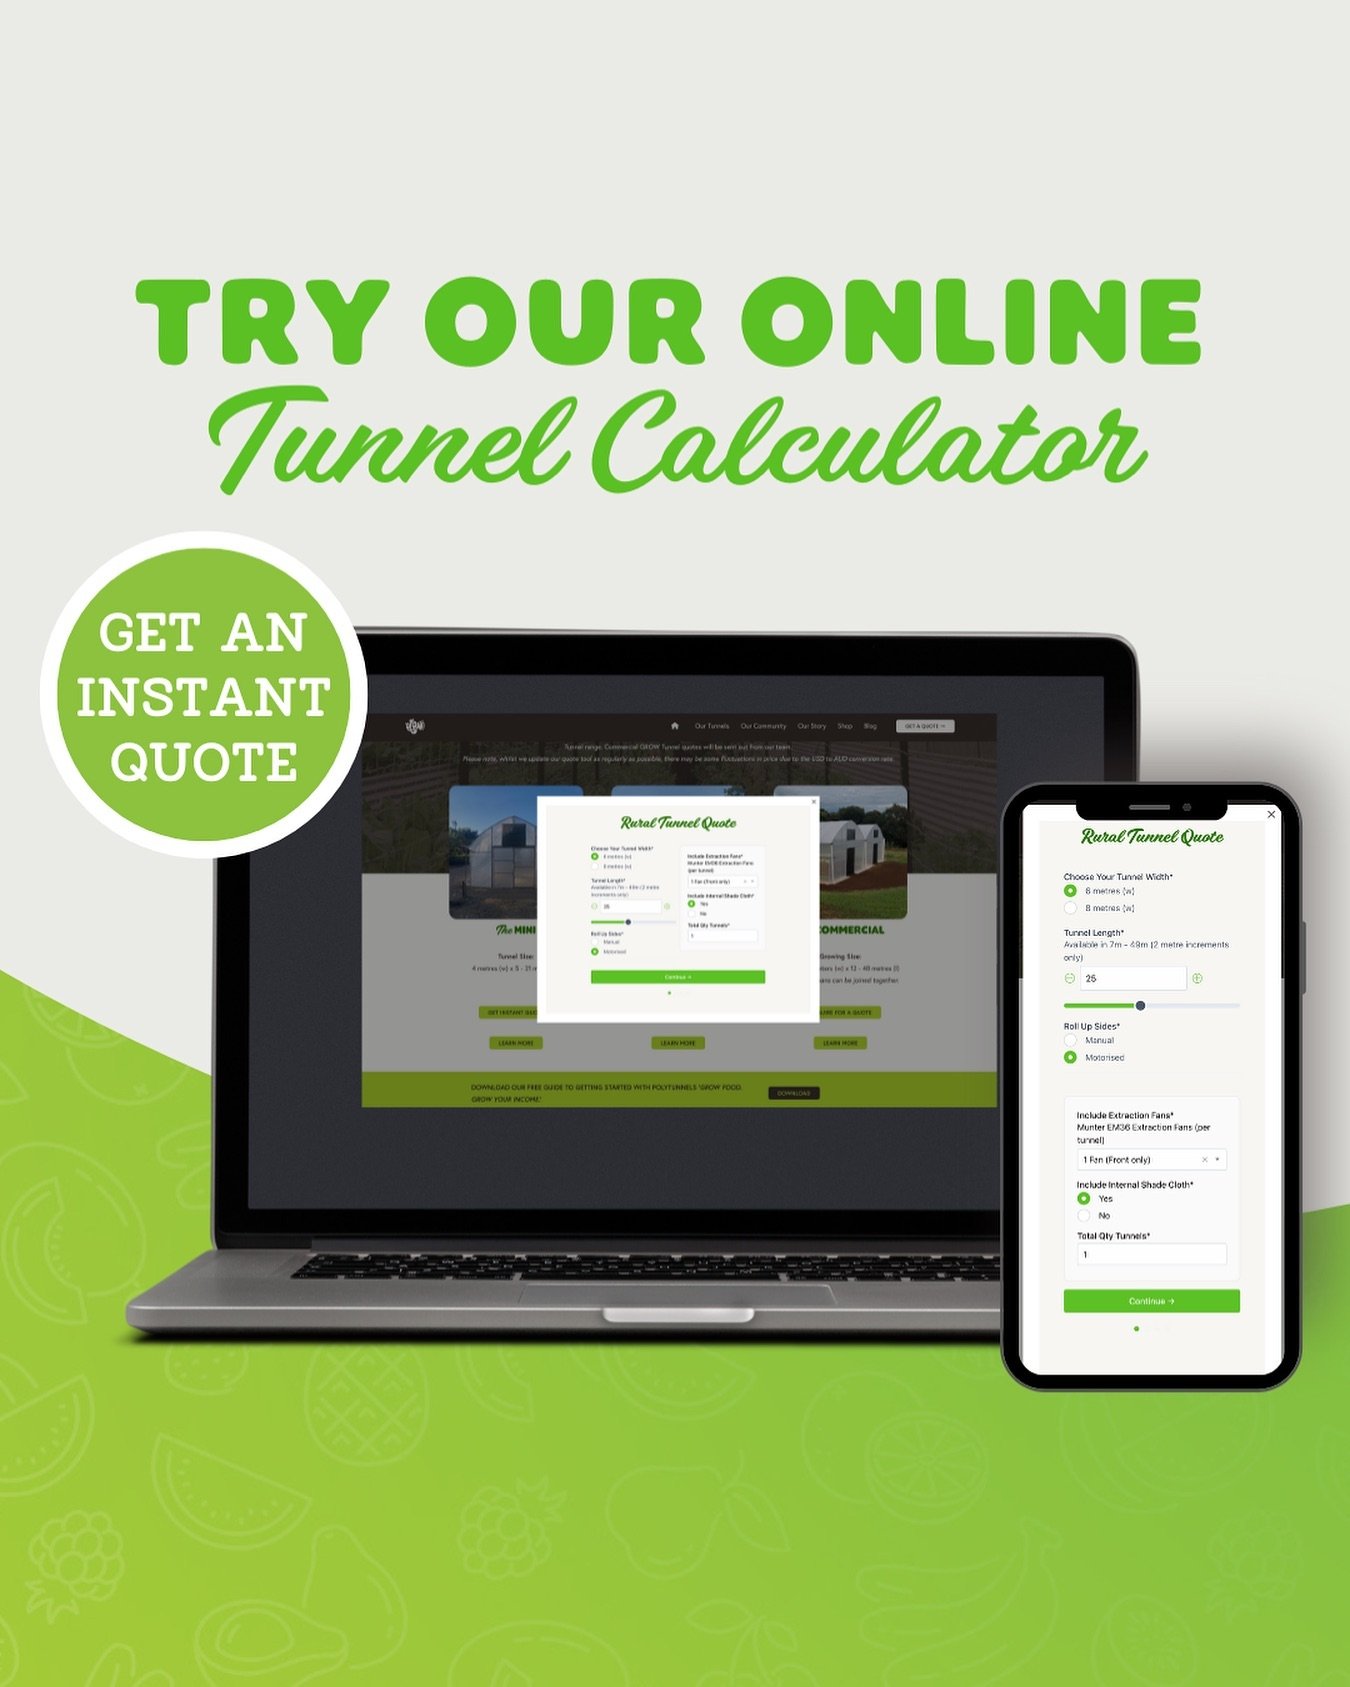 Thinking of growing inside a covered structure, but not sure what size will fit your budget?
Now you can plan the best GROW Tunnel with the help of our instant quote calculator - simply choose your preferred tunnel model, adjust to your required size